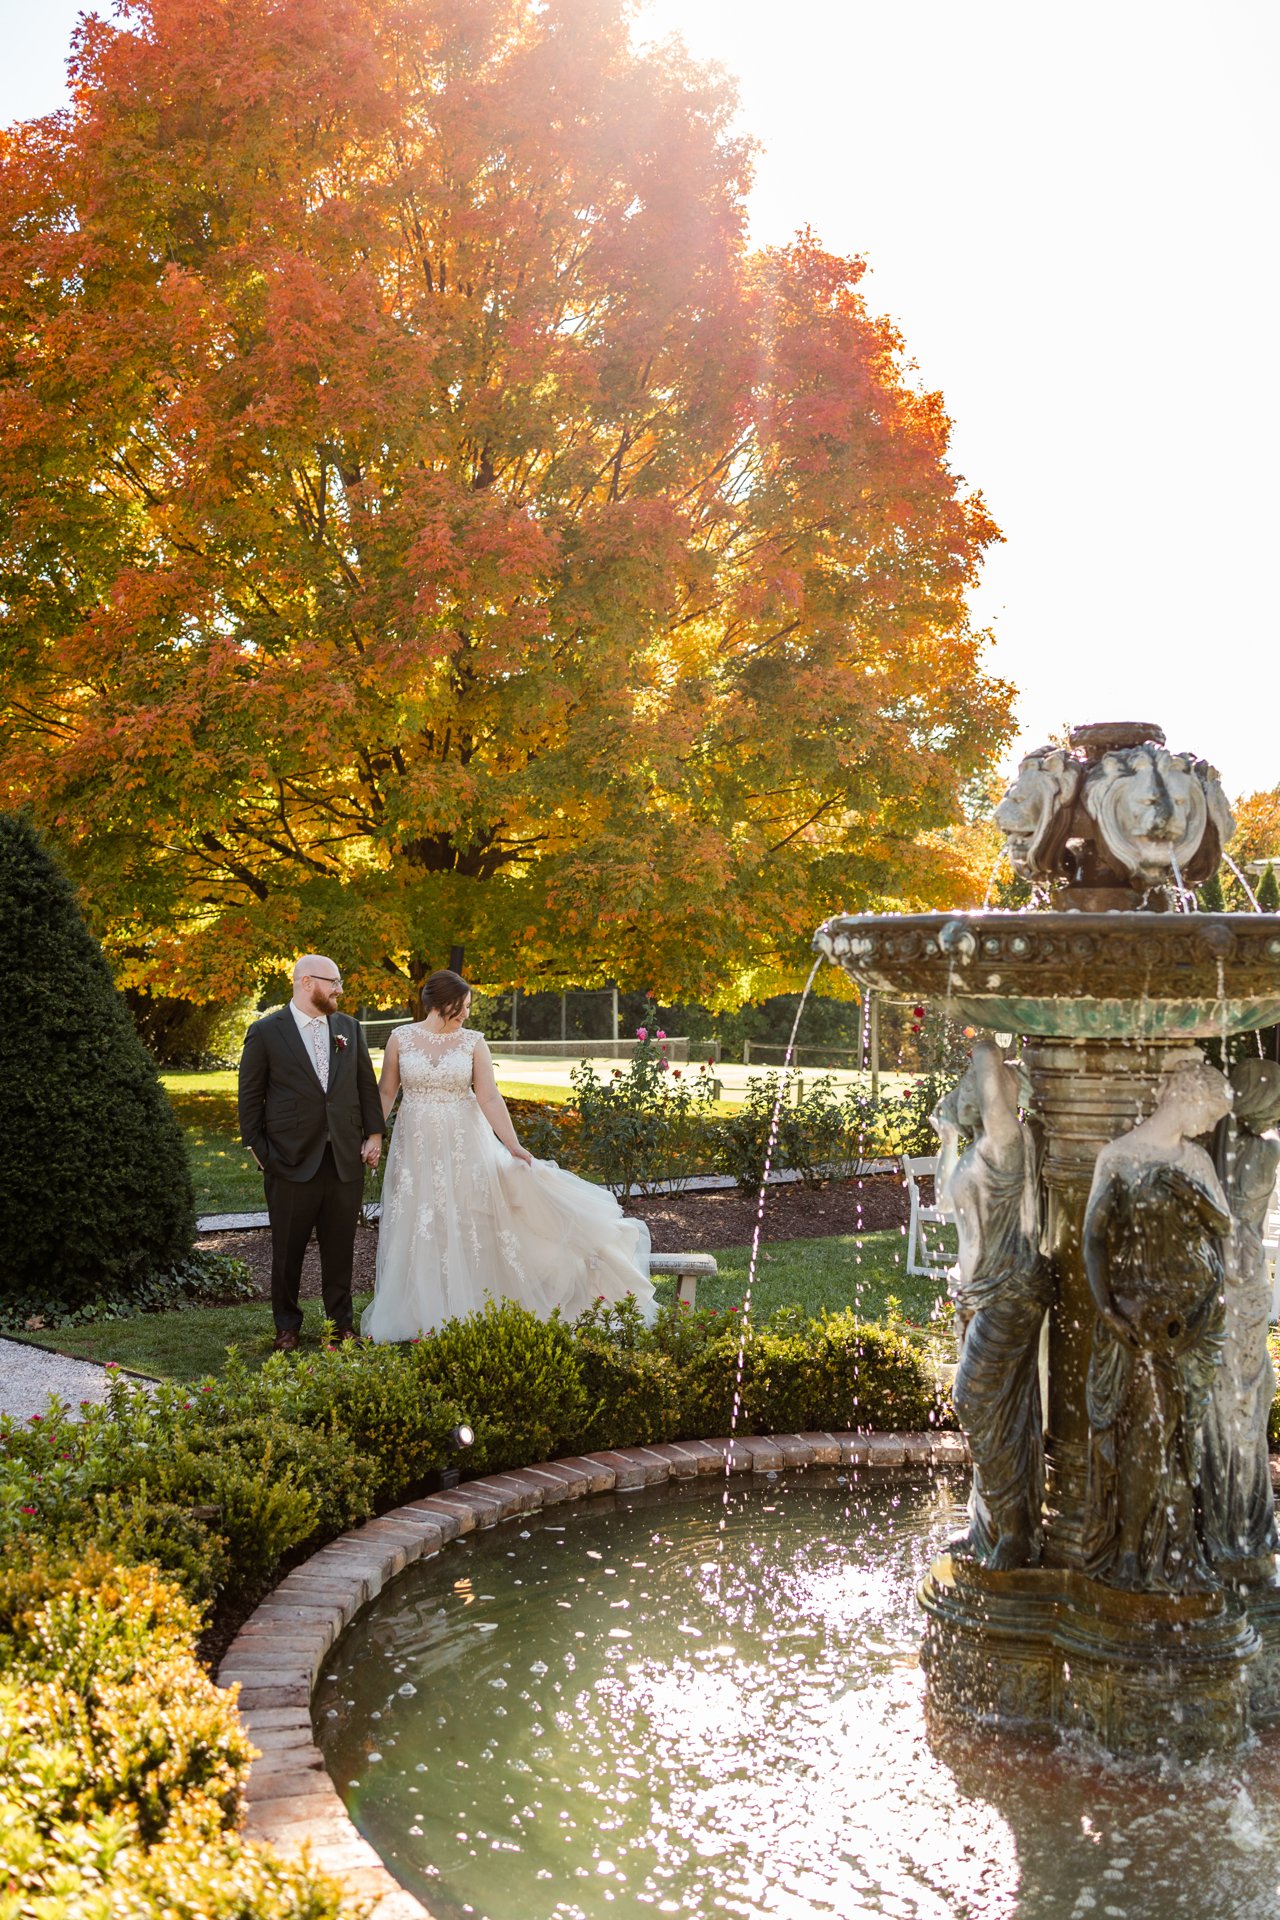 A Formal Black-and-Gold Wedding Outdoors in Indiana